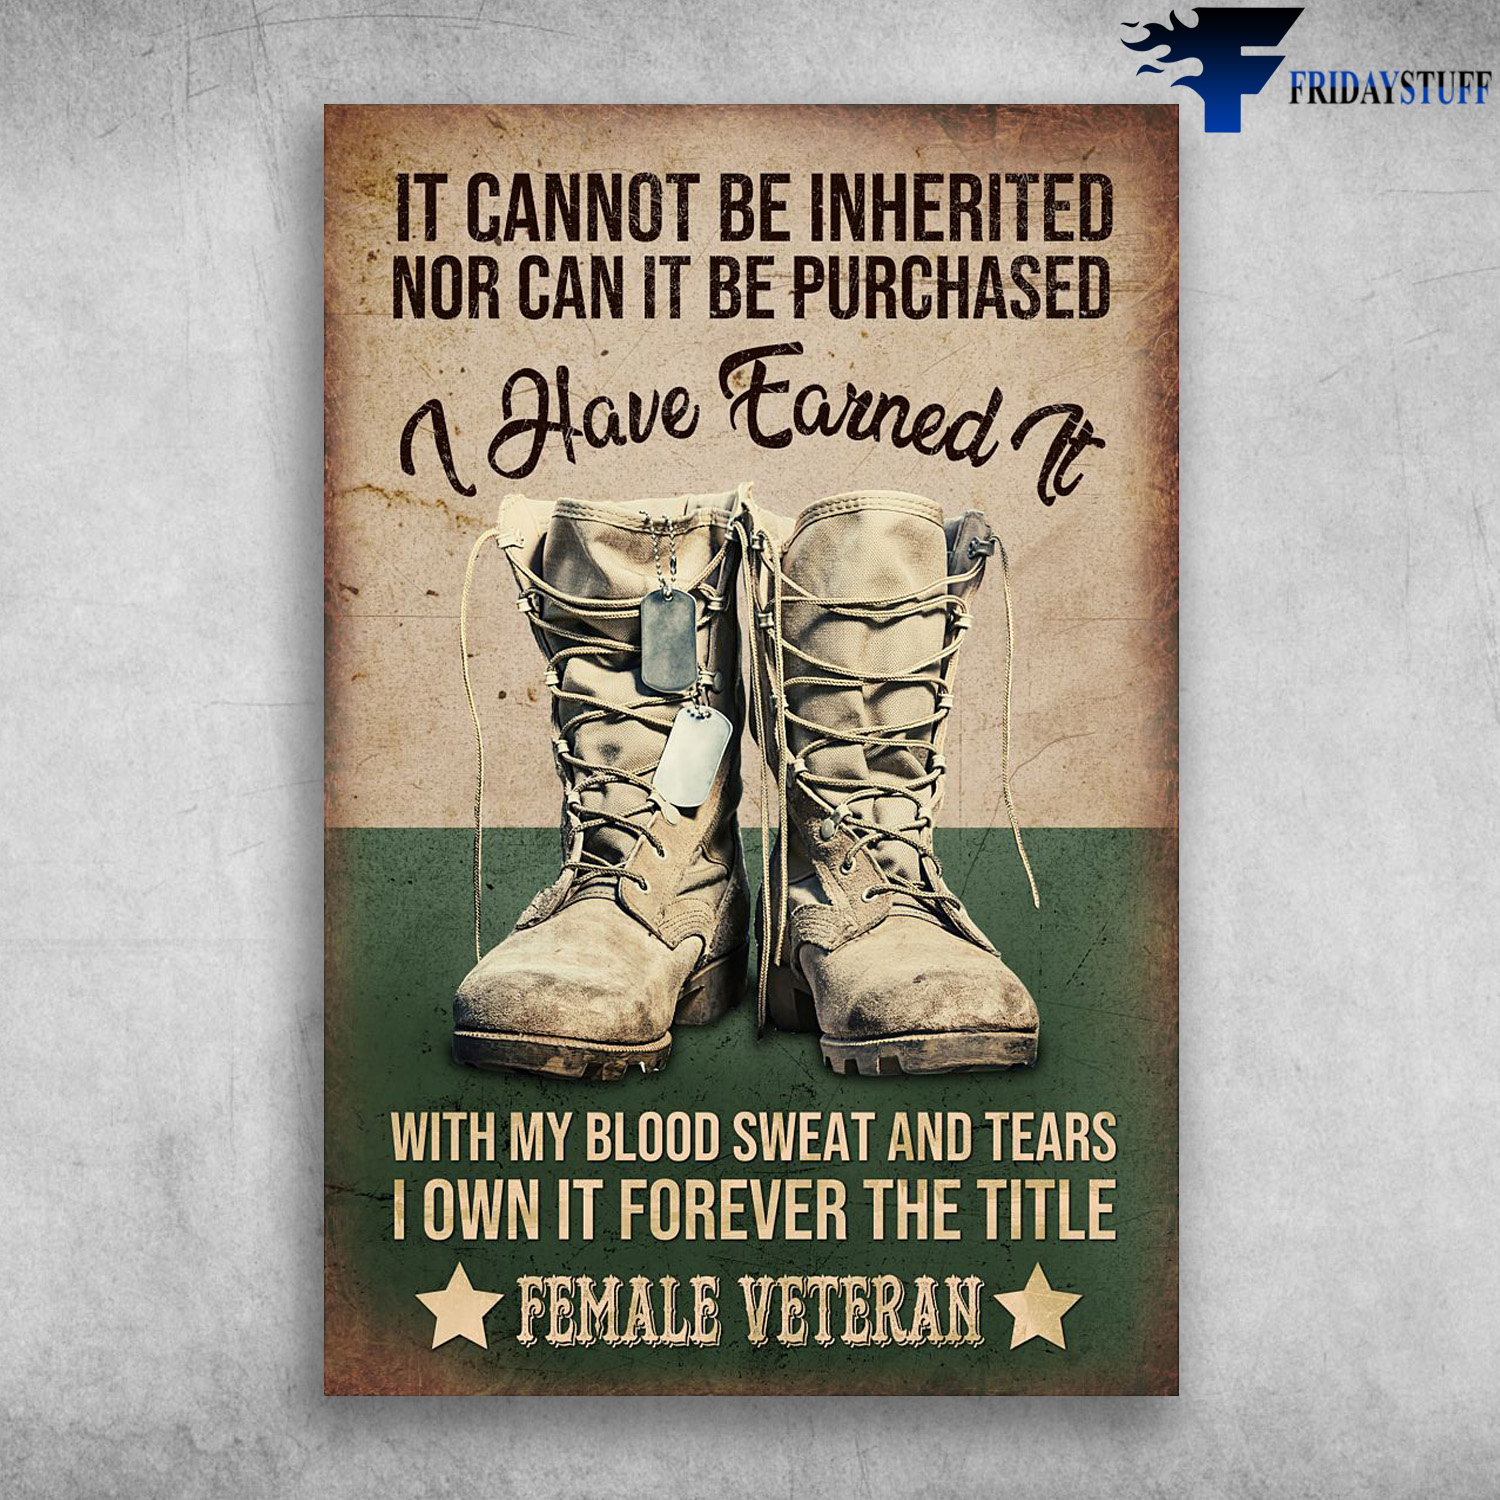 The Veteran Shoe - It Cannot Be Inherited, Nor Can It Be Purchased, I Have Earned It, With M Blood Sweat And Tears, I Own It Forever The Title, Female Veteran